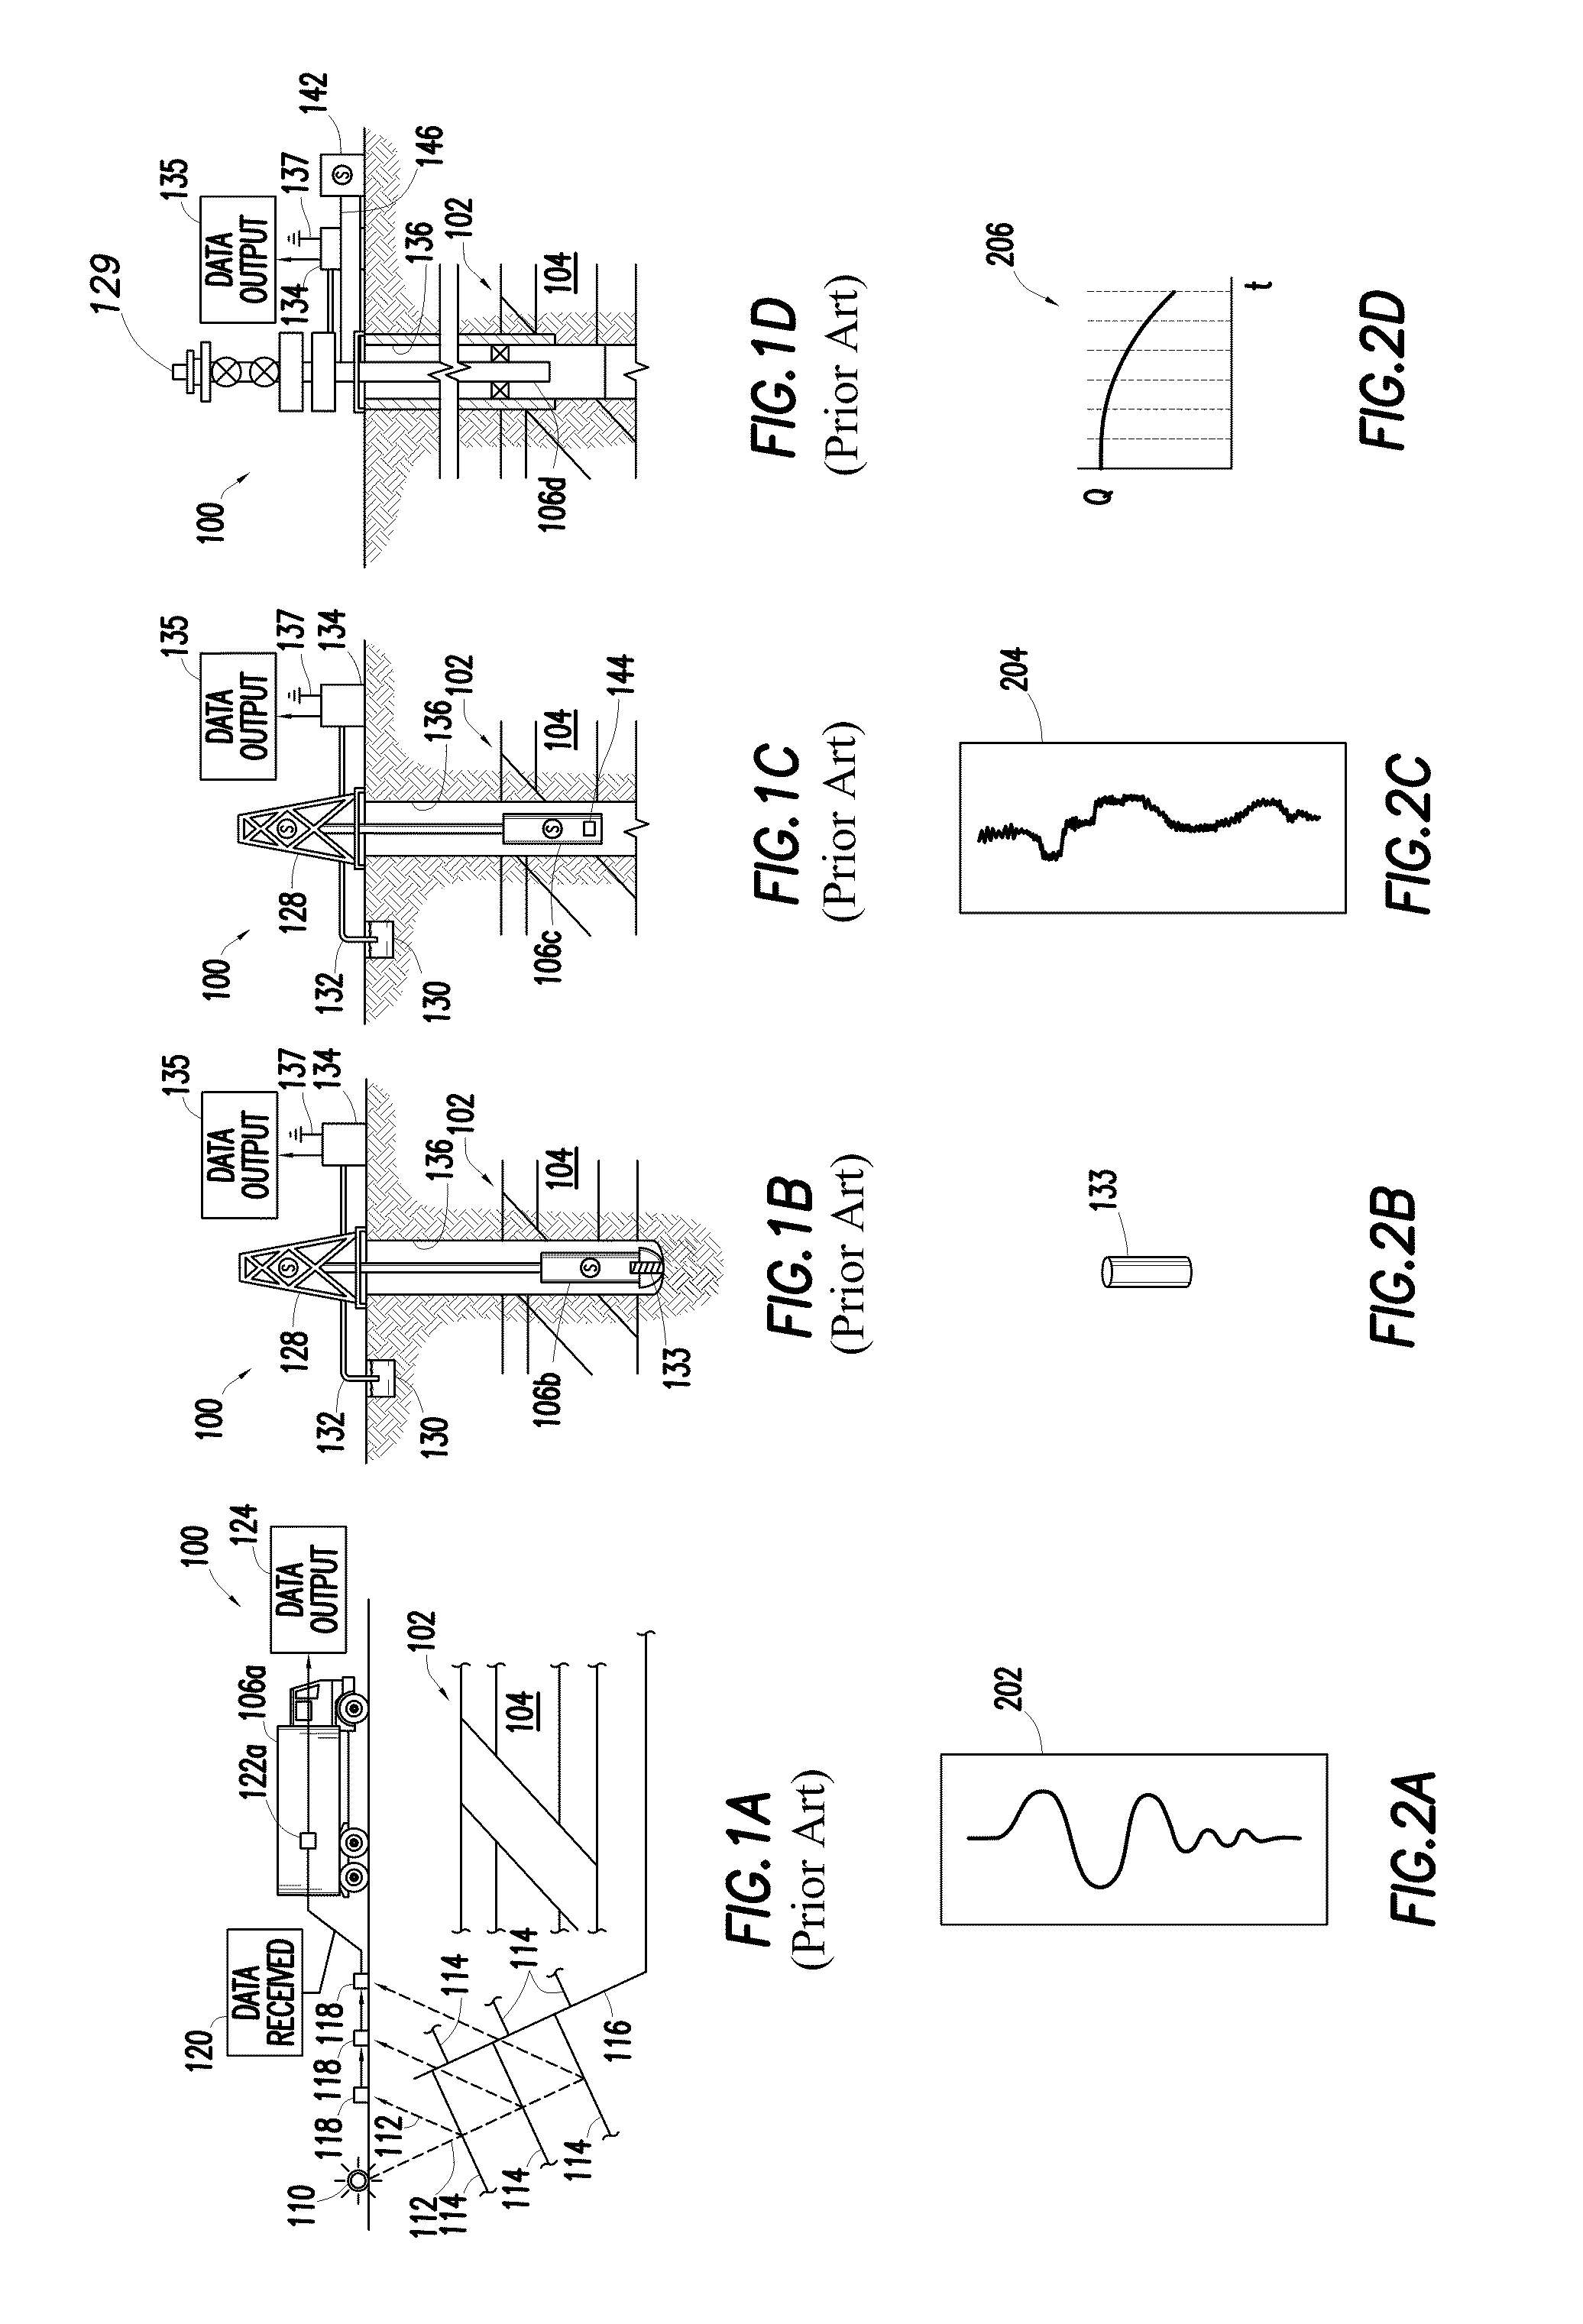 System and method for performing oilfield operations